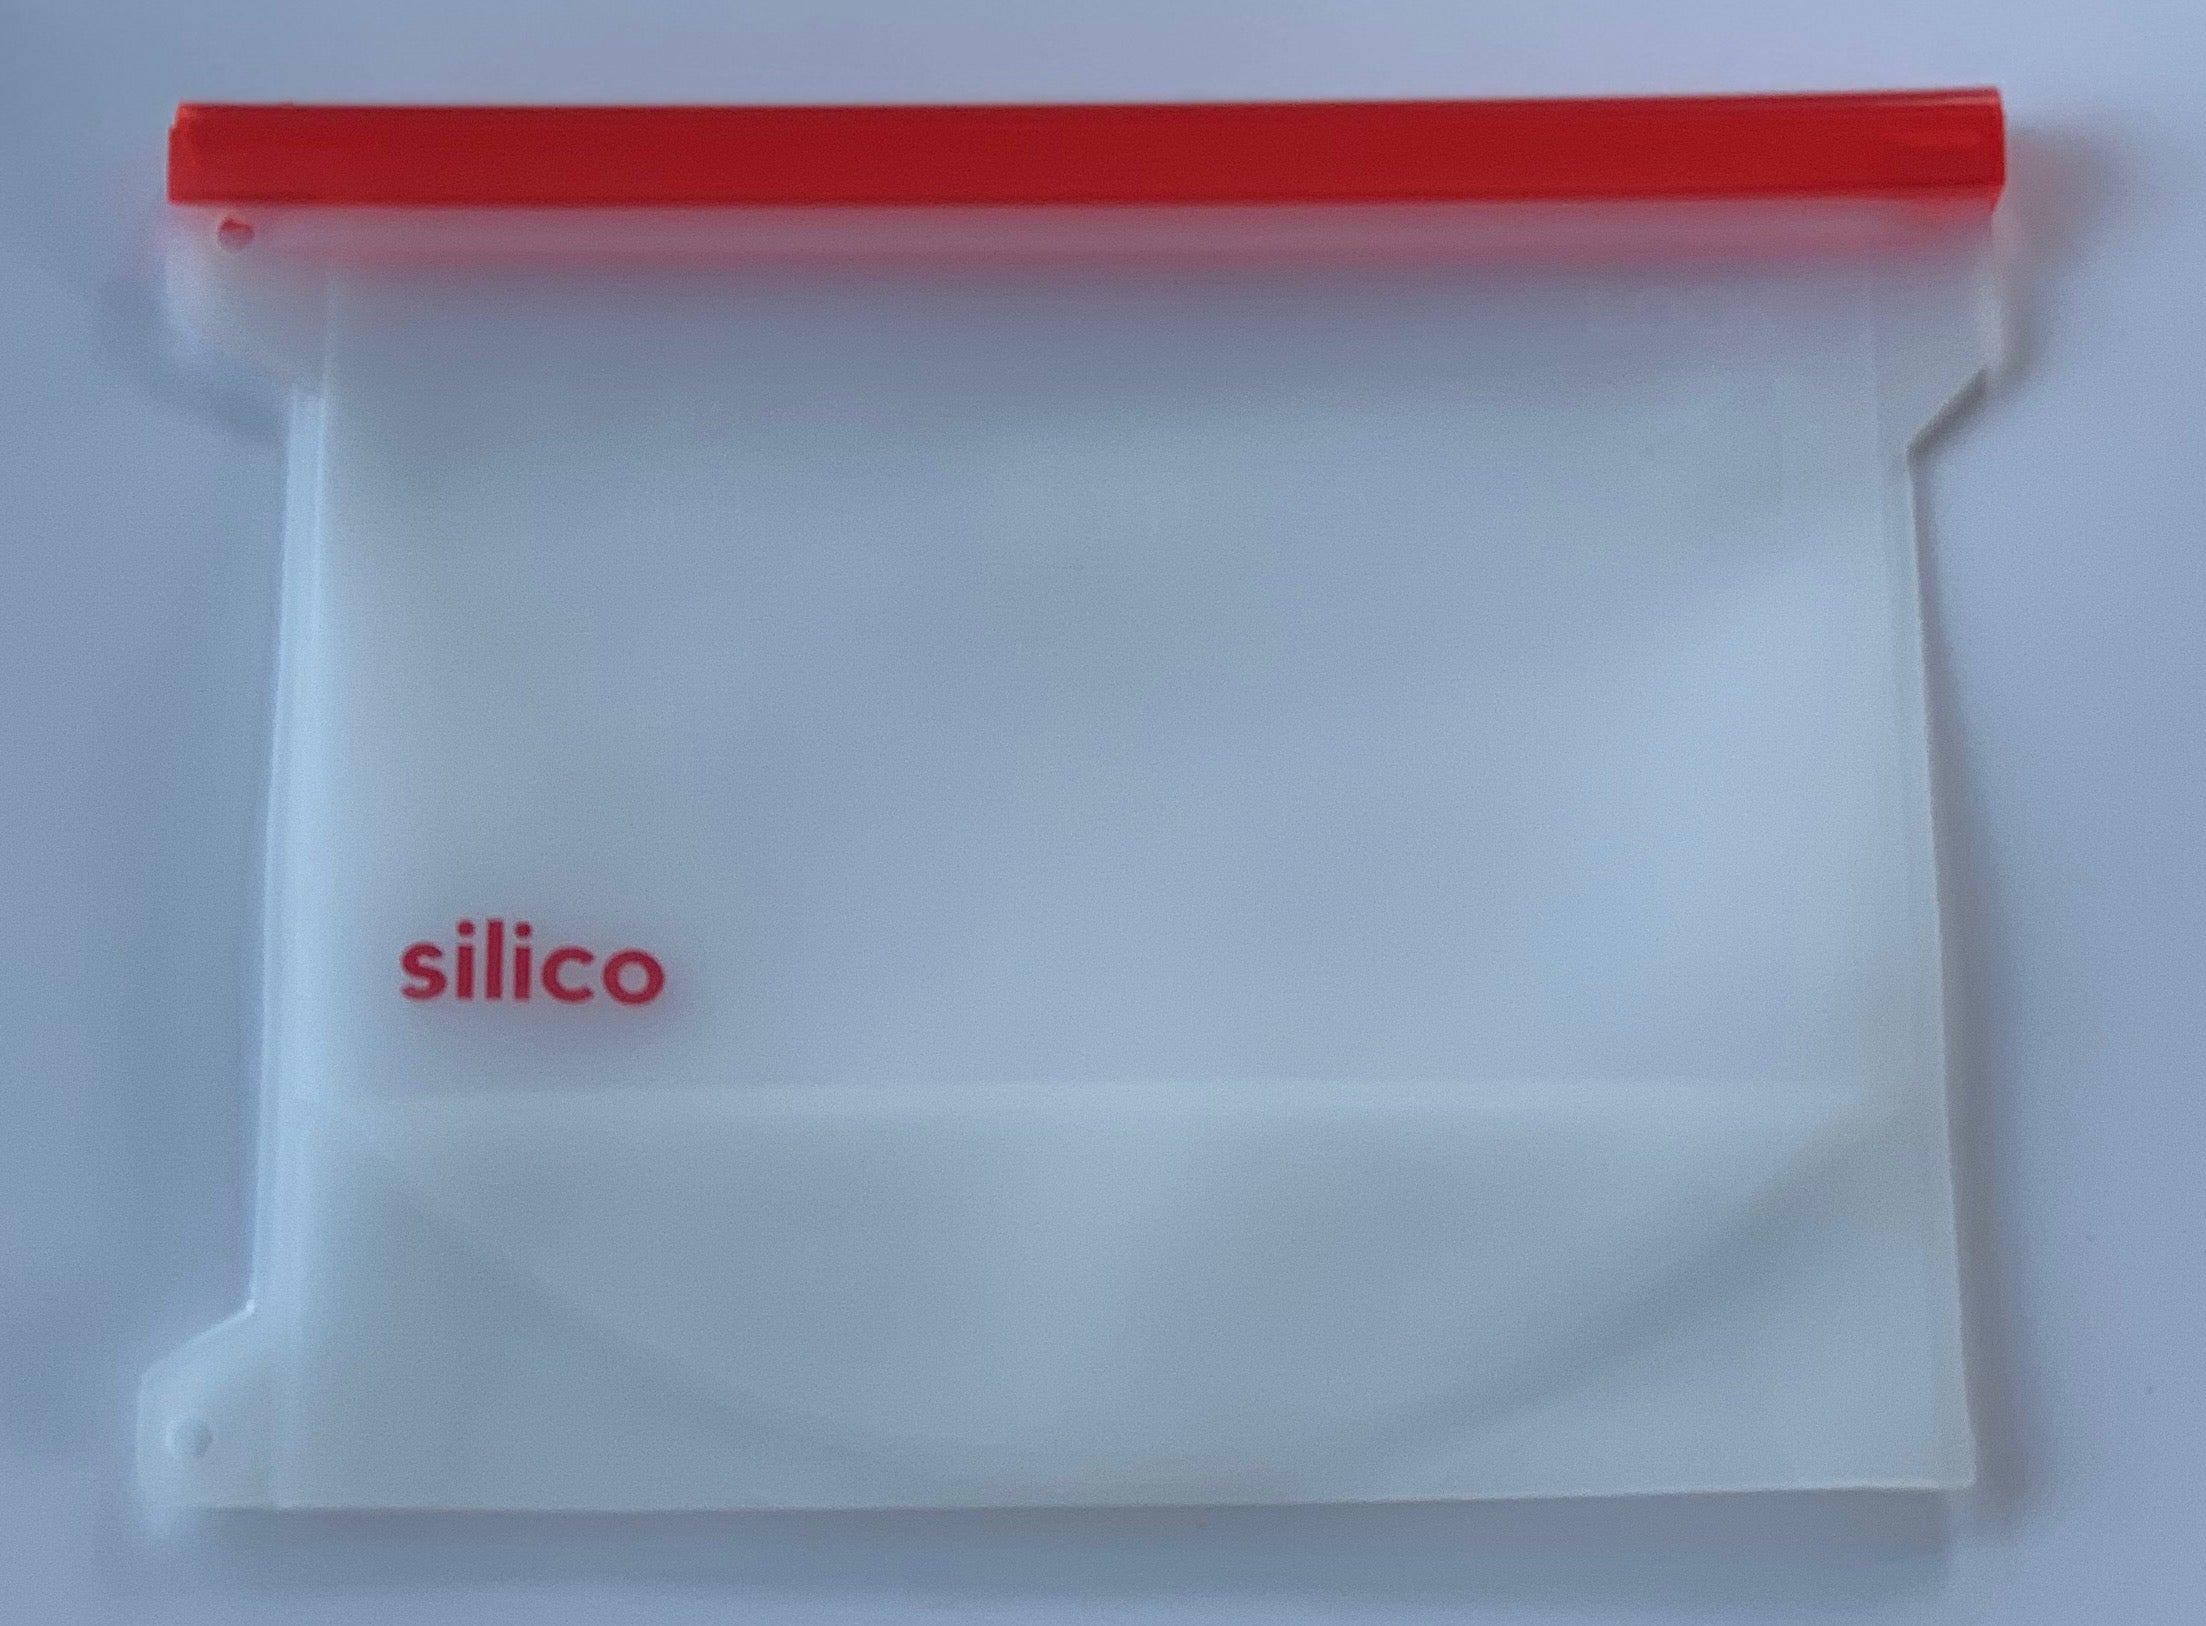 Silico Slide n' Store Small (1000 mL)